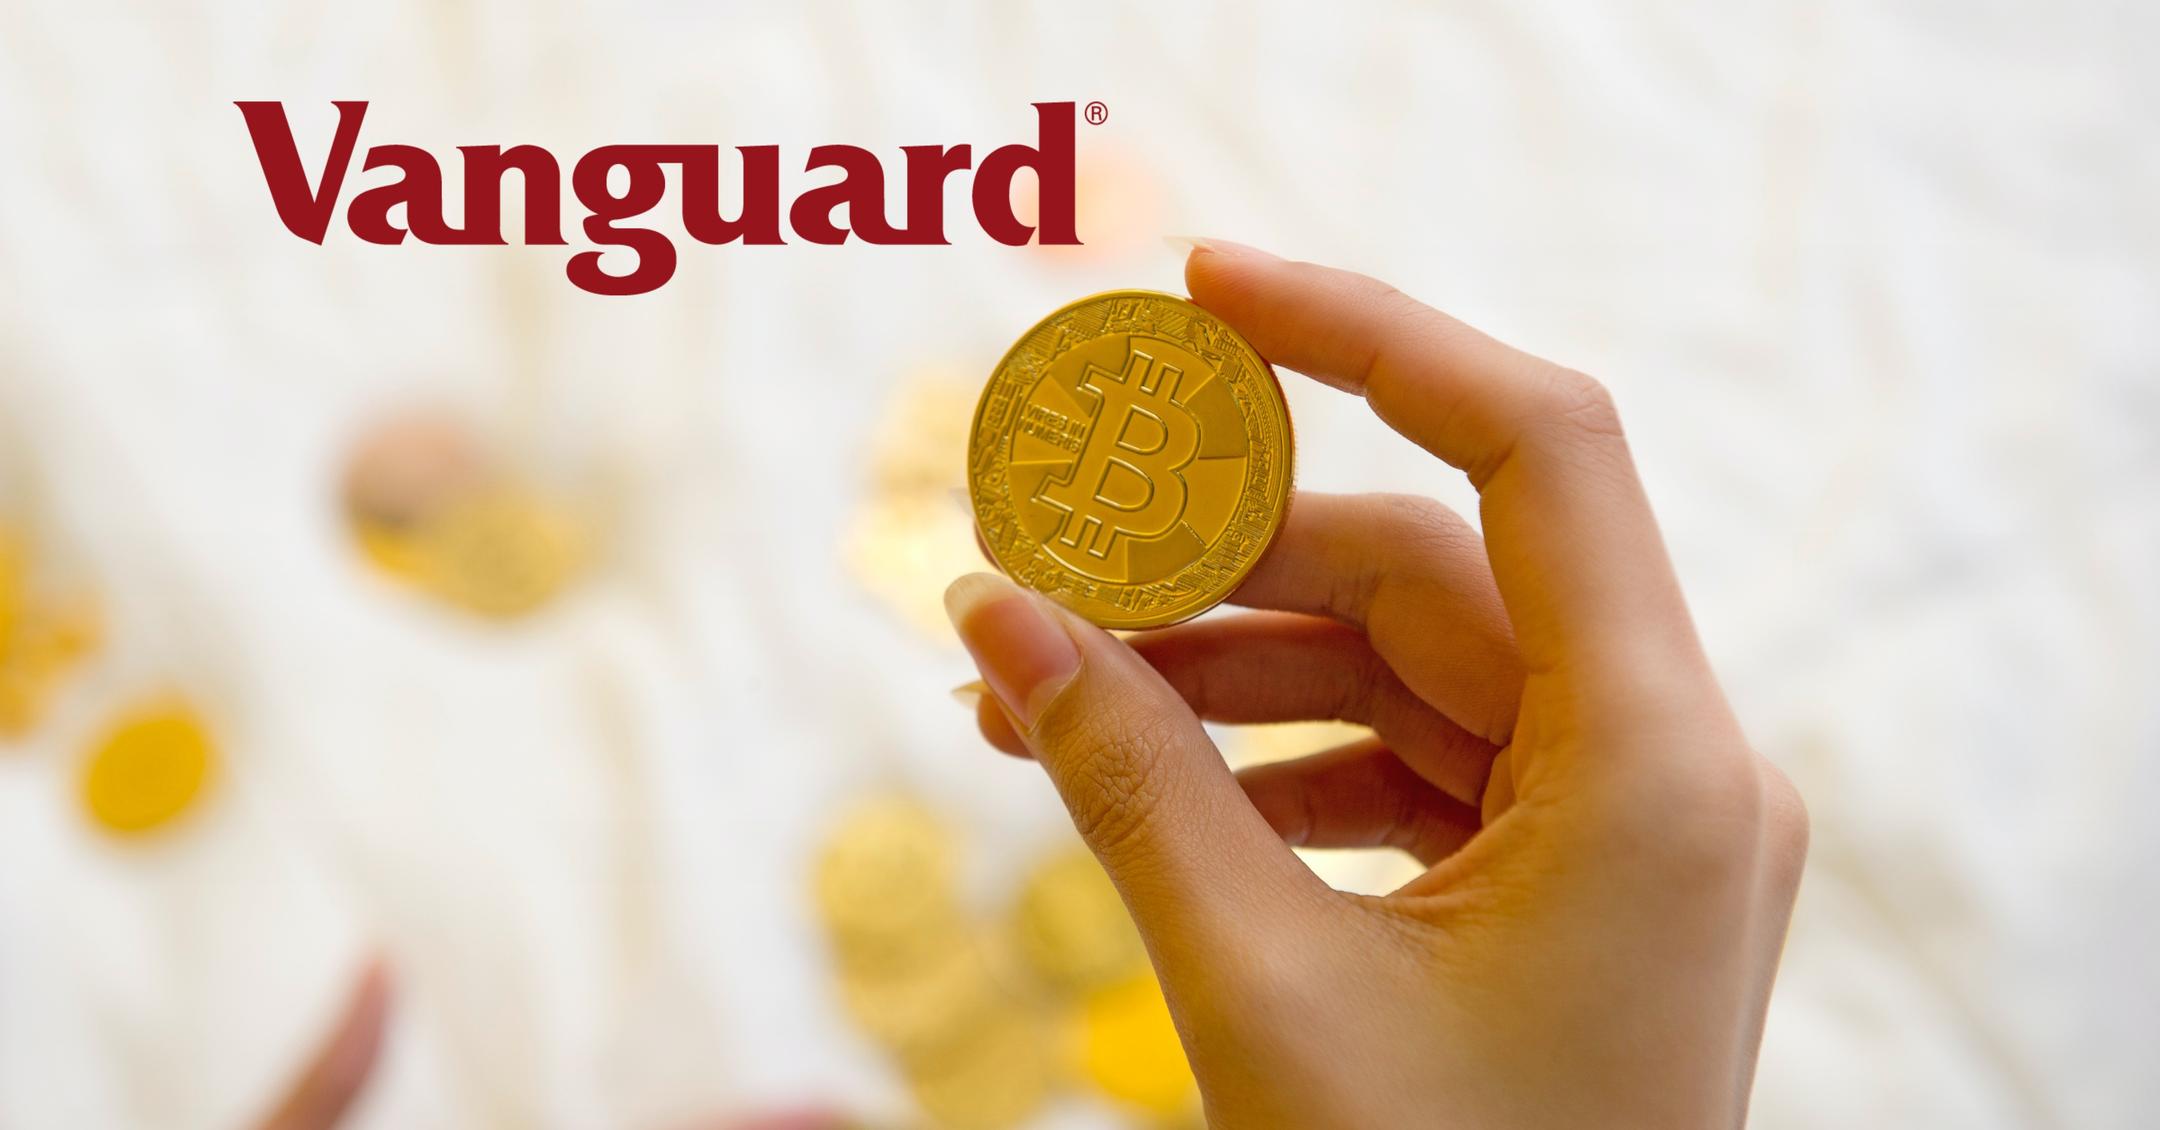 Does Vanguard have a crypto ETF?